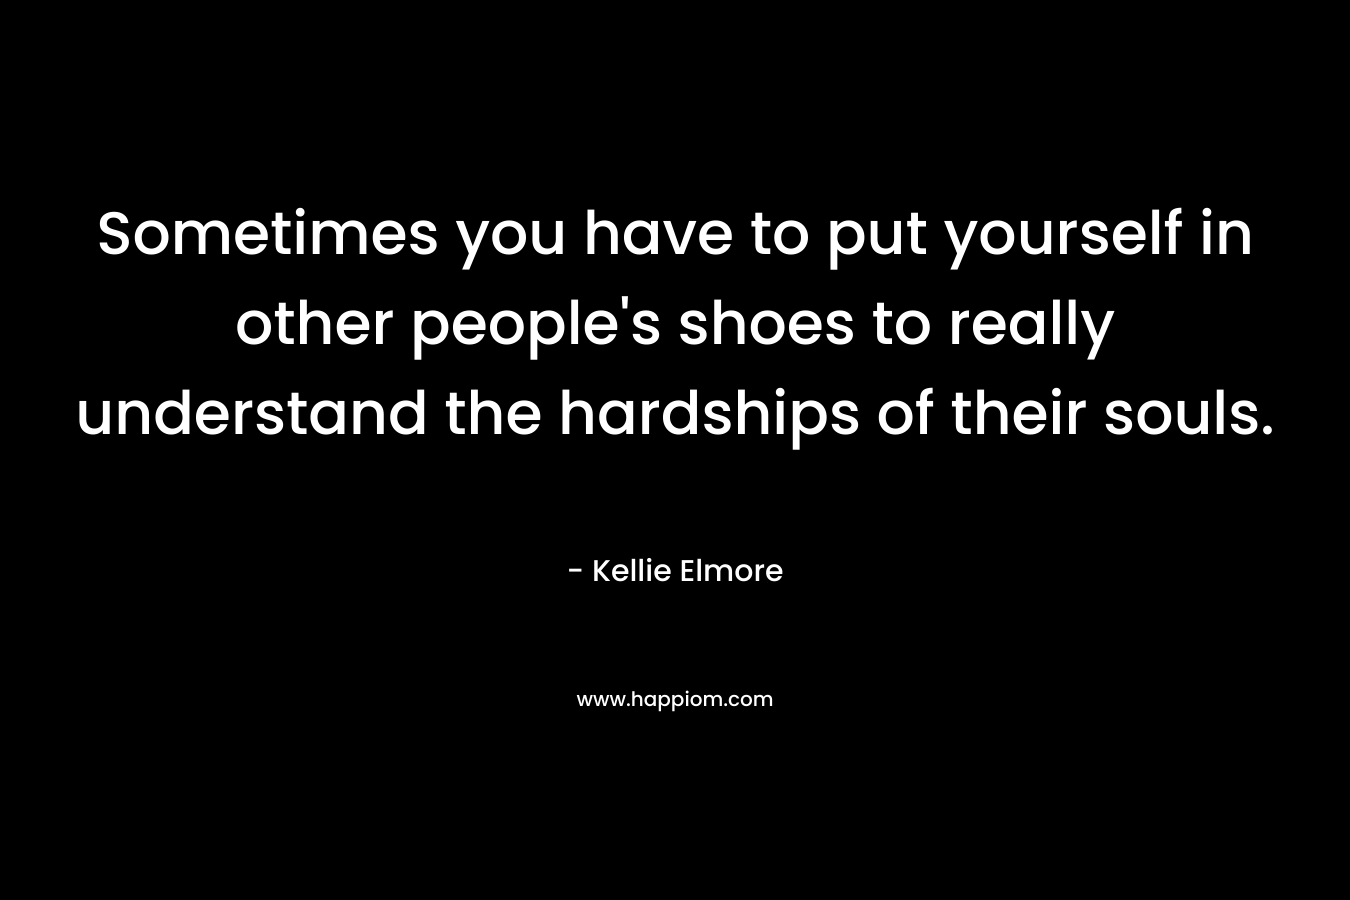 Sometimes you have to put yourself in other people’s shoes to really understand the hardships of their souls. – Kellie Elmore